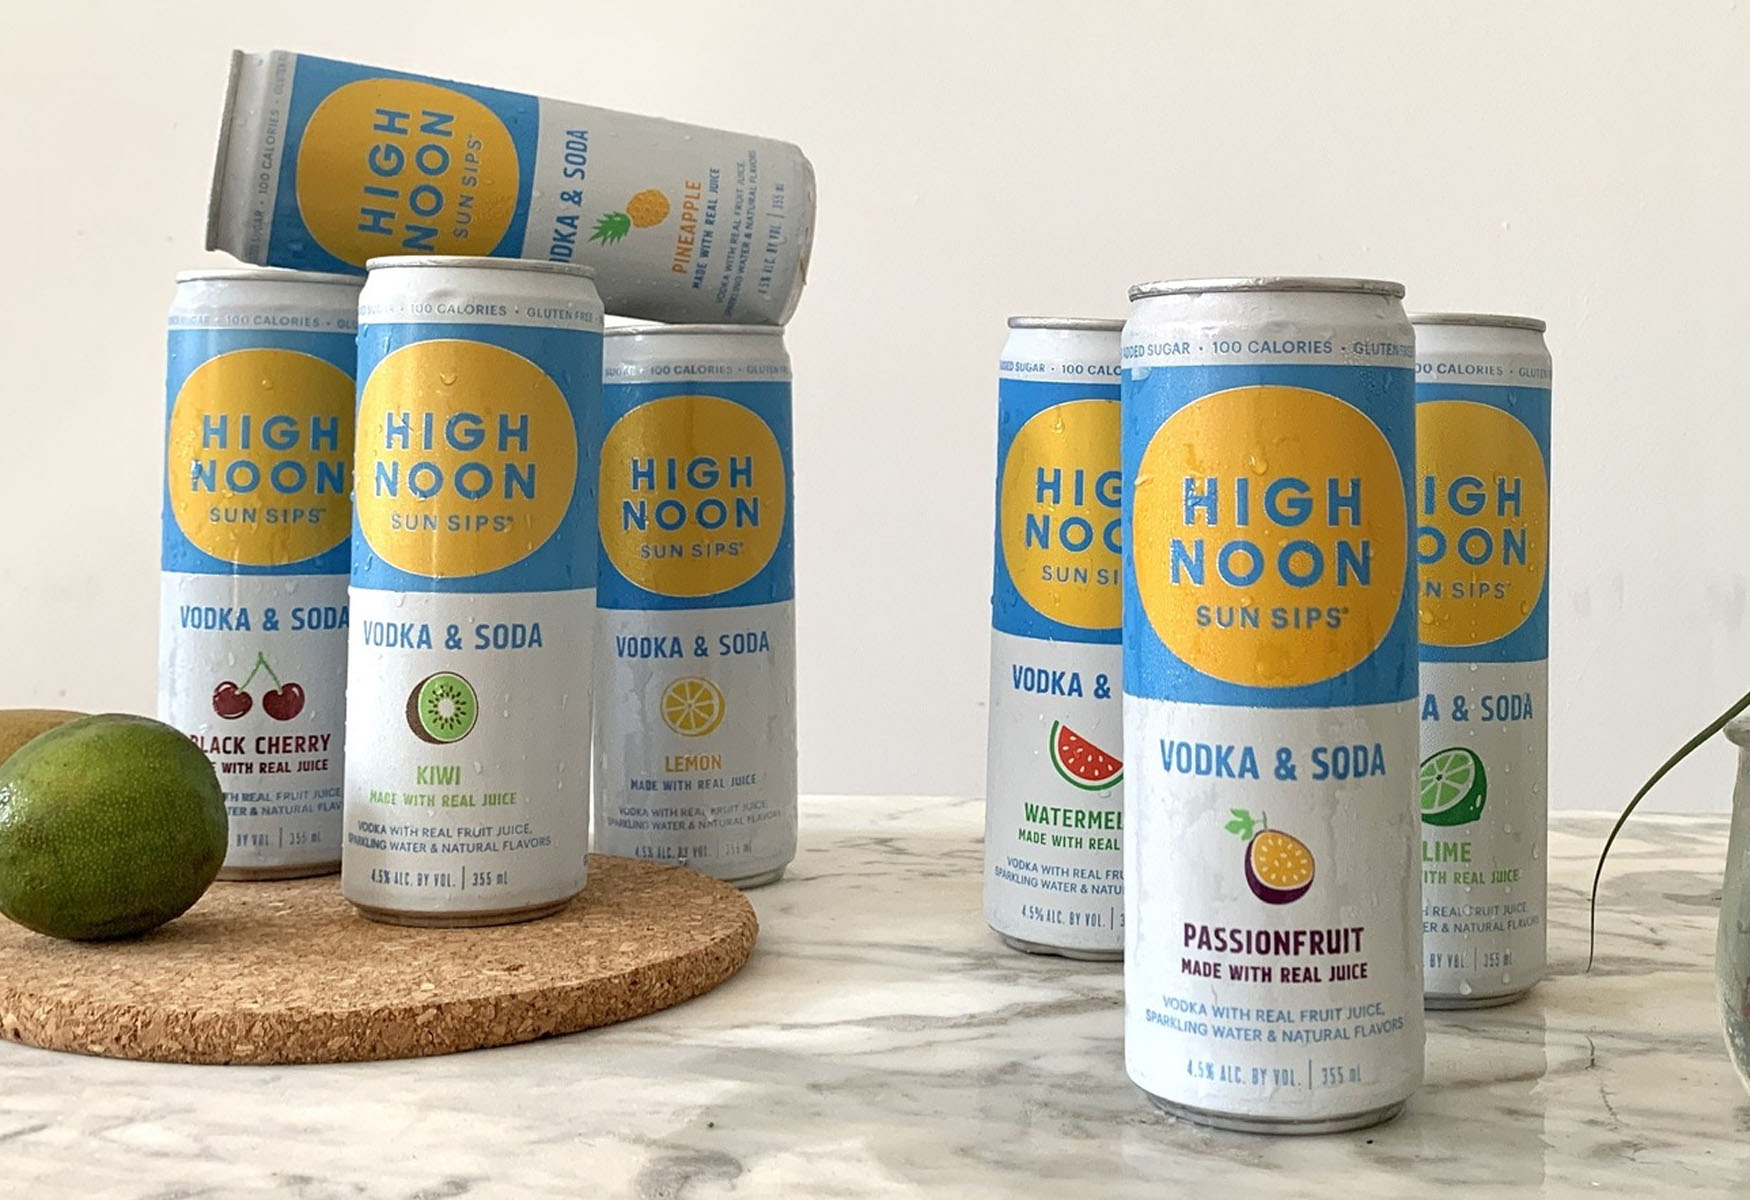 11-high-noon-drink-nutrition-facts